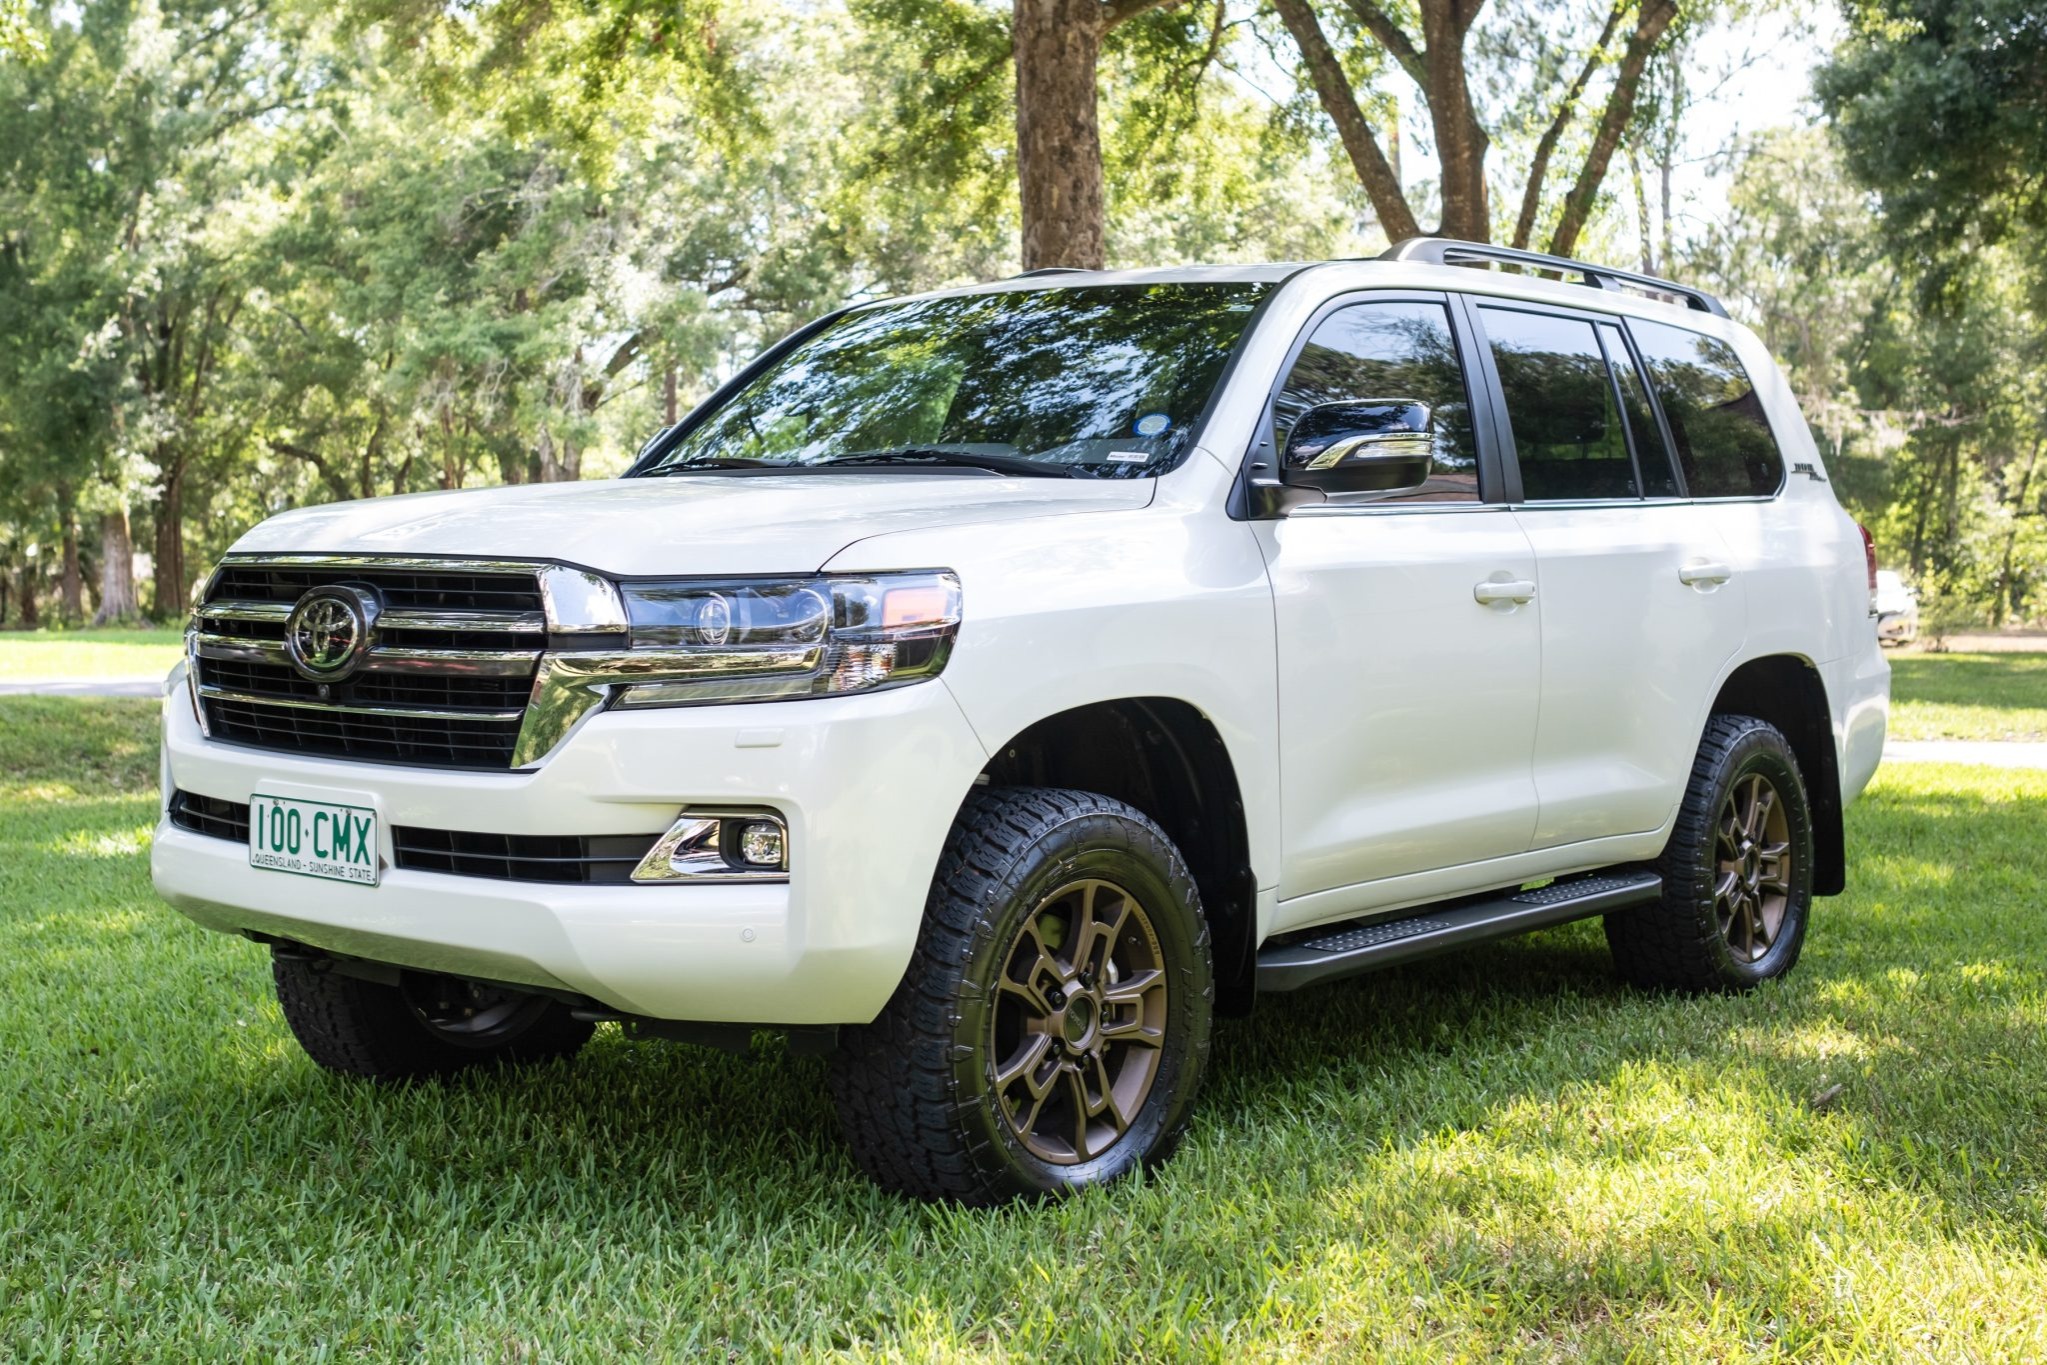 Used 2020 Toyota Land Cruiser URJ200 Heritage Edition Review